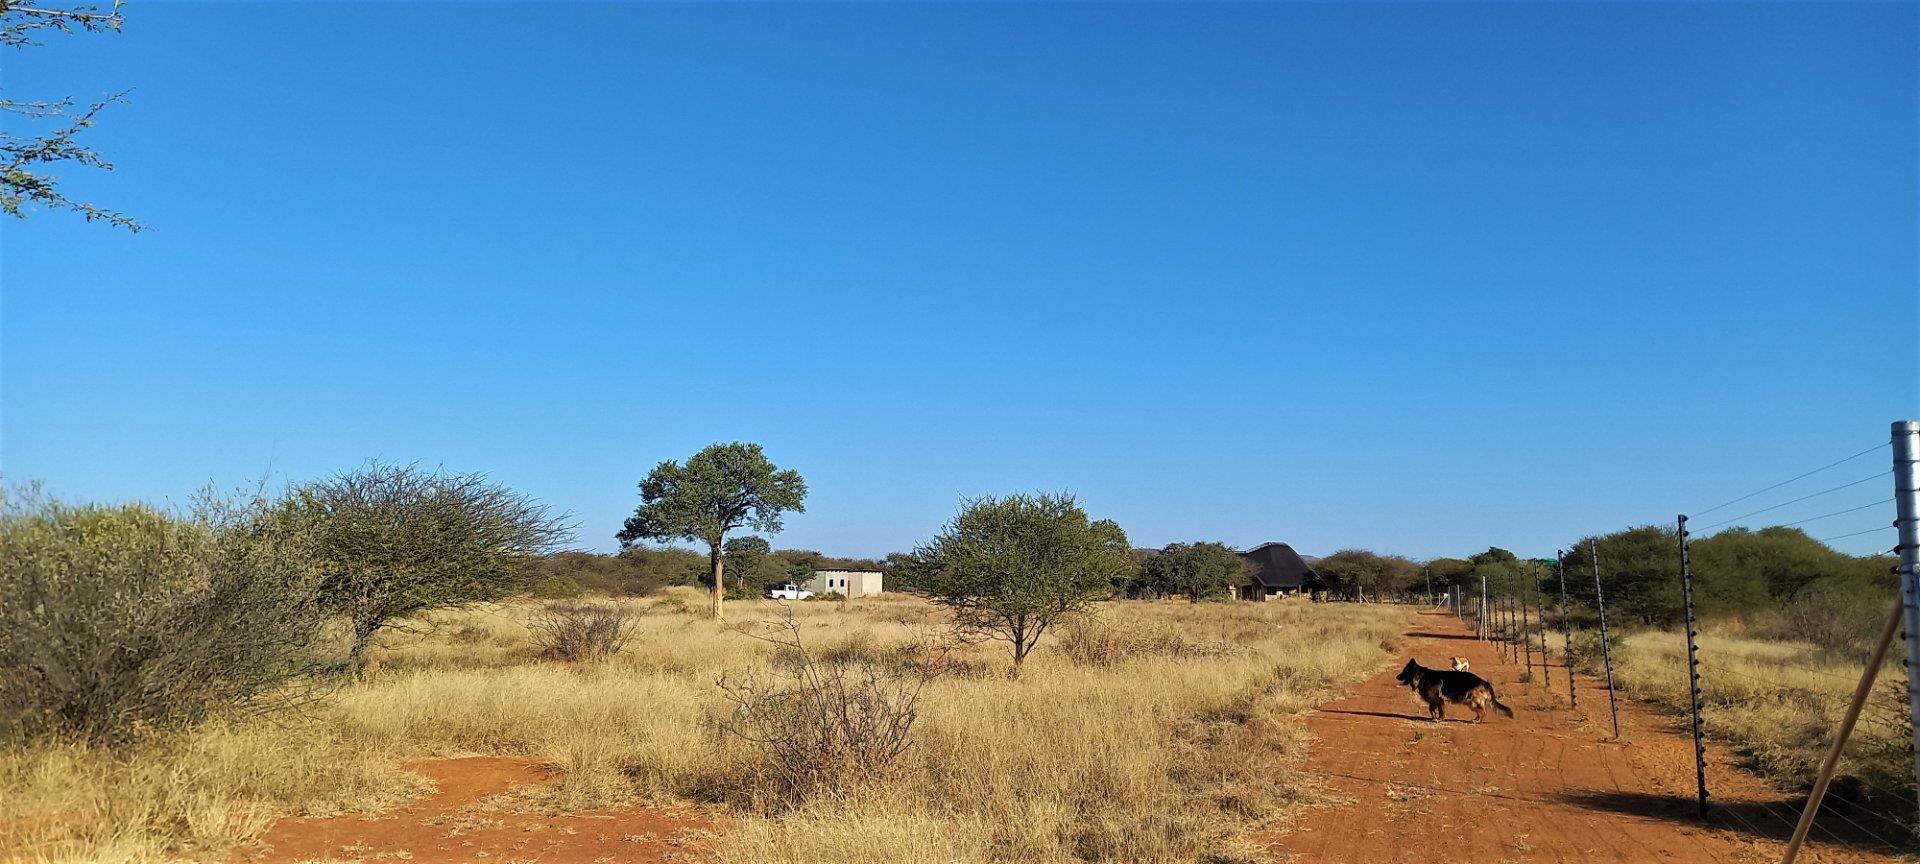 Vacant Land for Sale - Limpopo